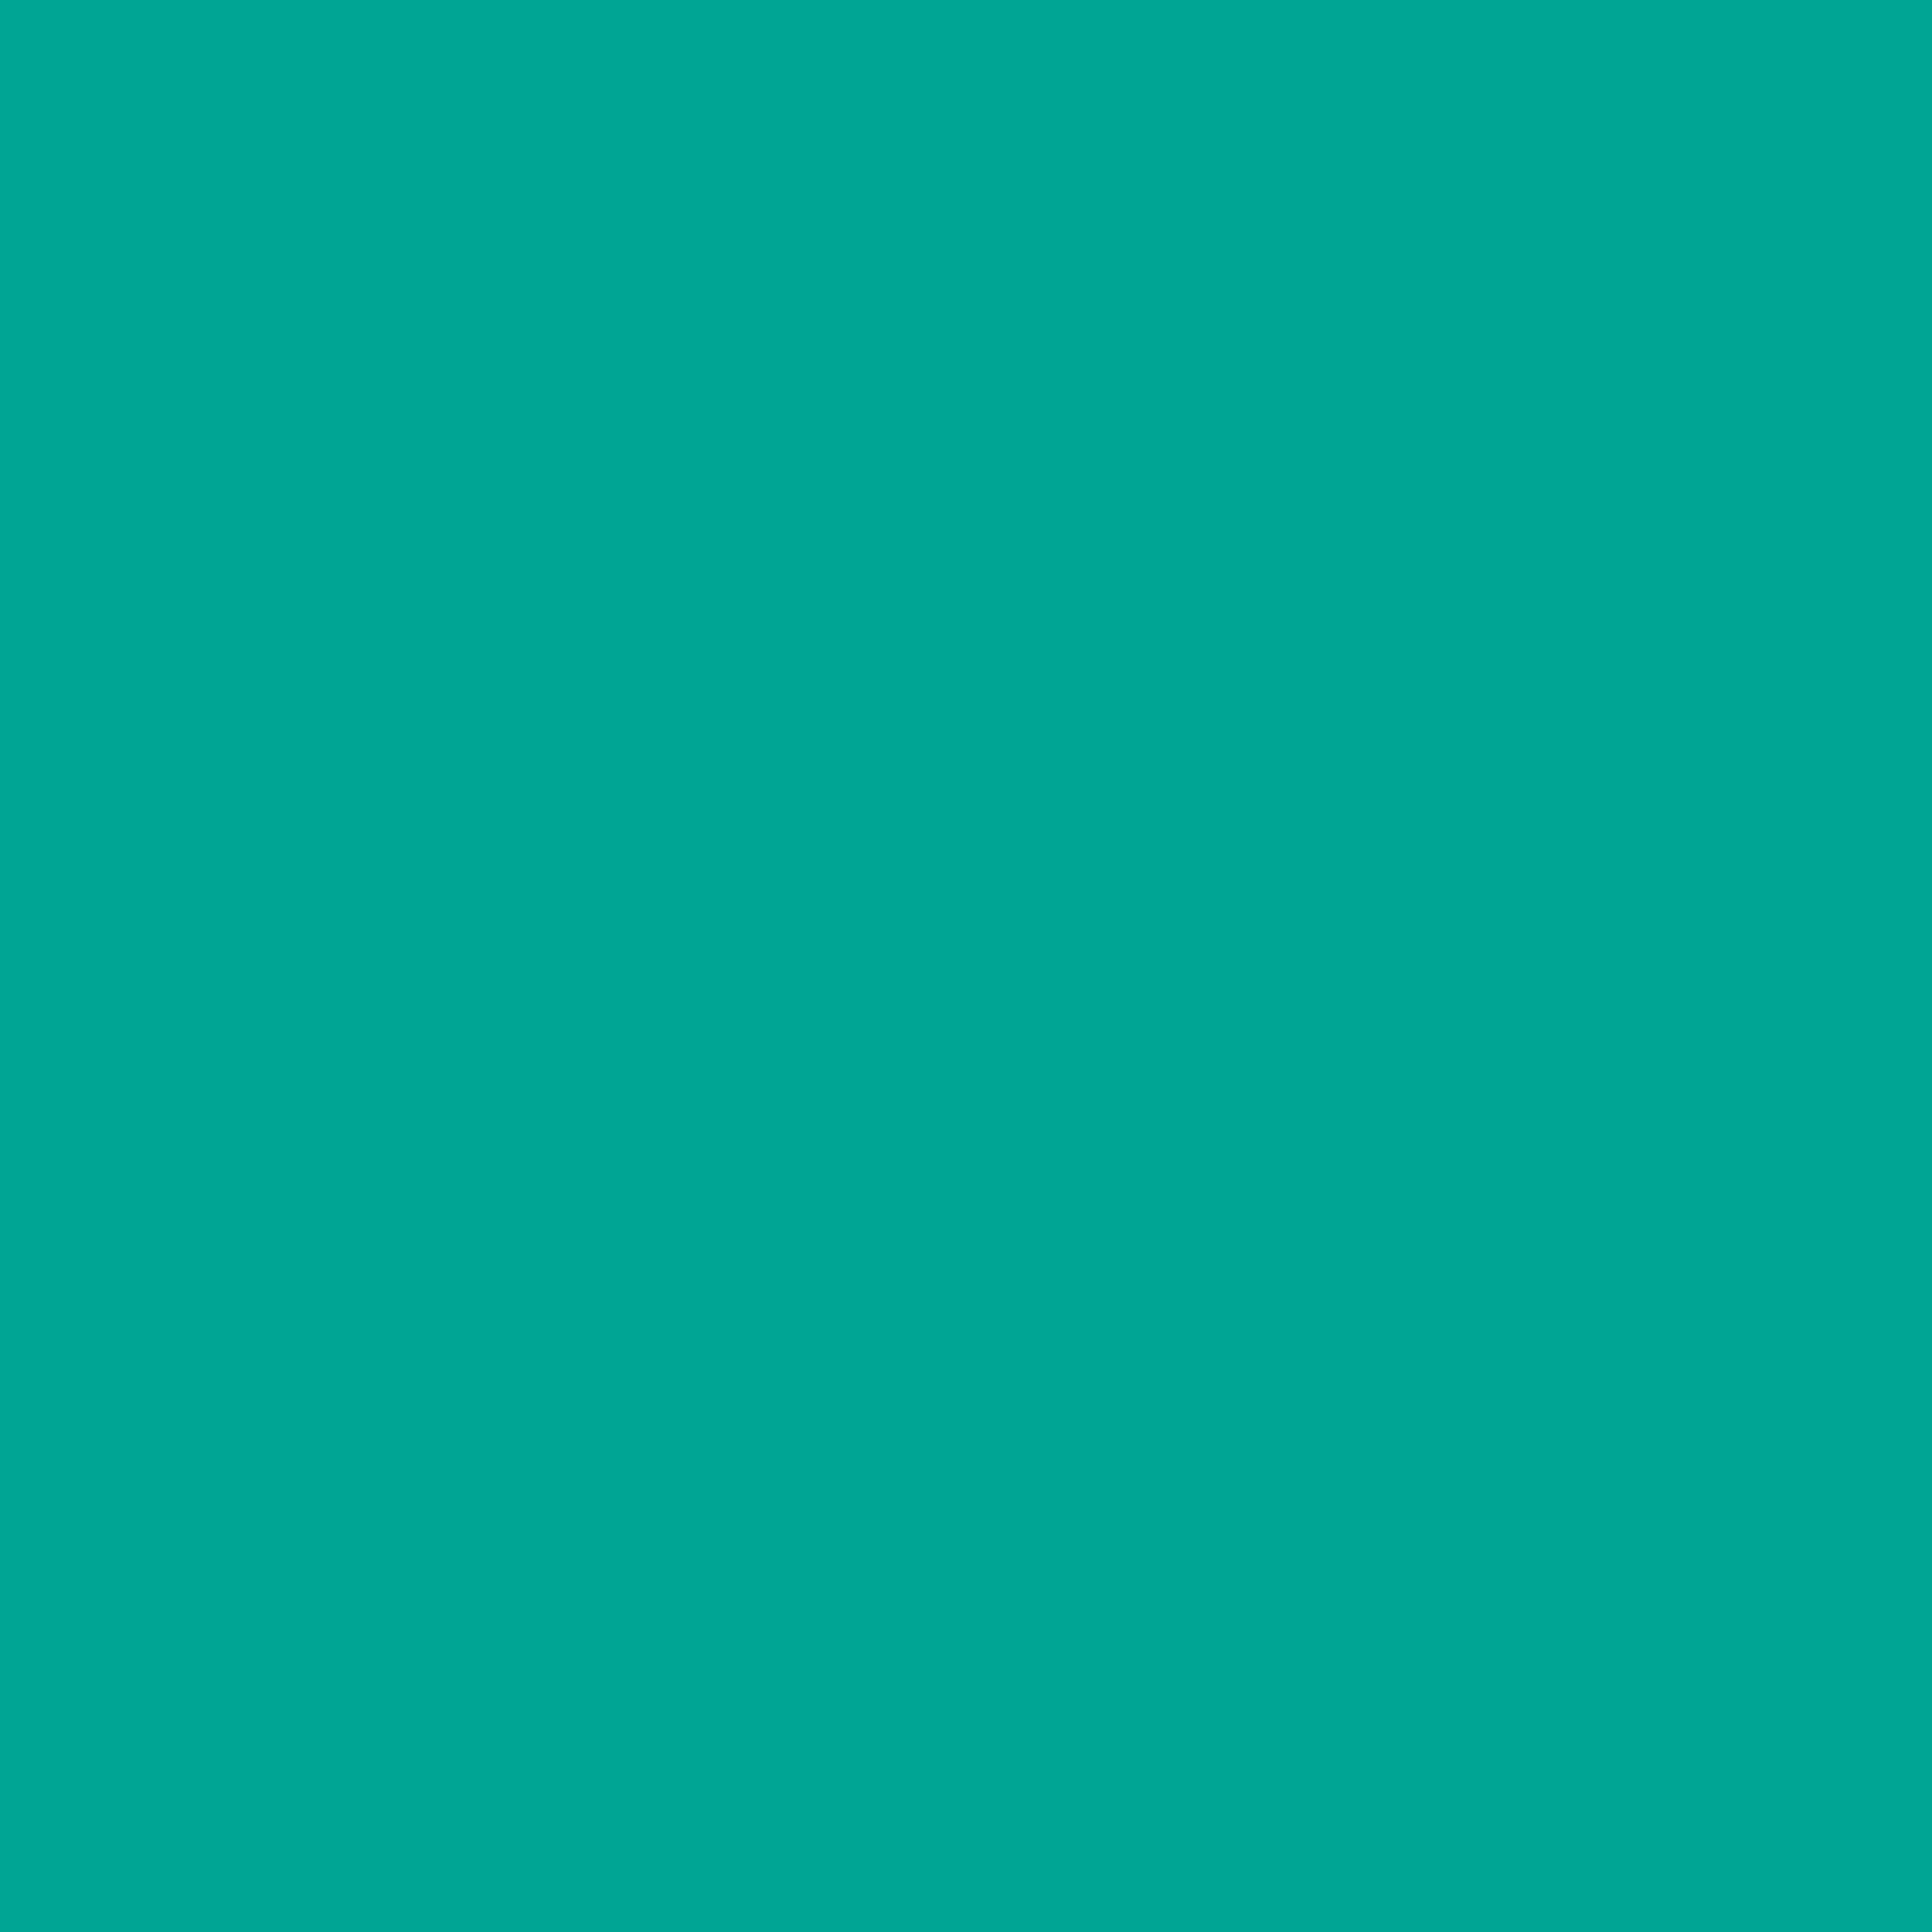 2732x2732 Persian Green Solid Color Background